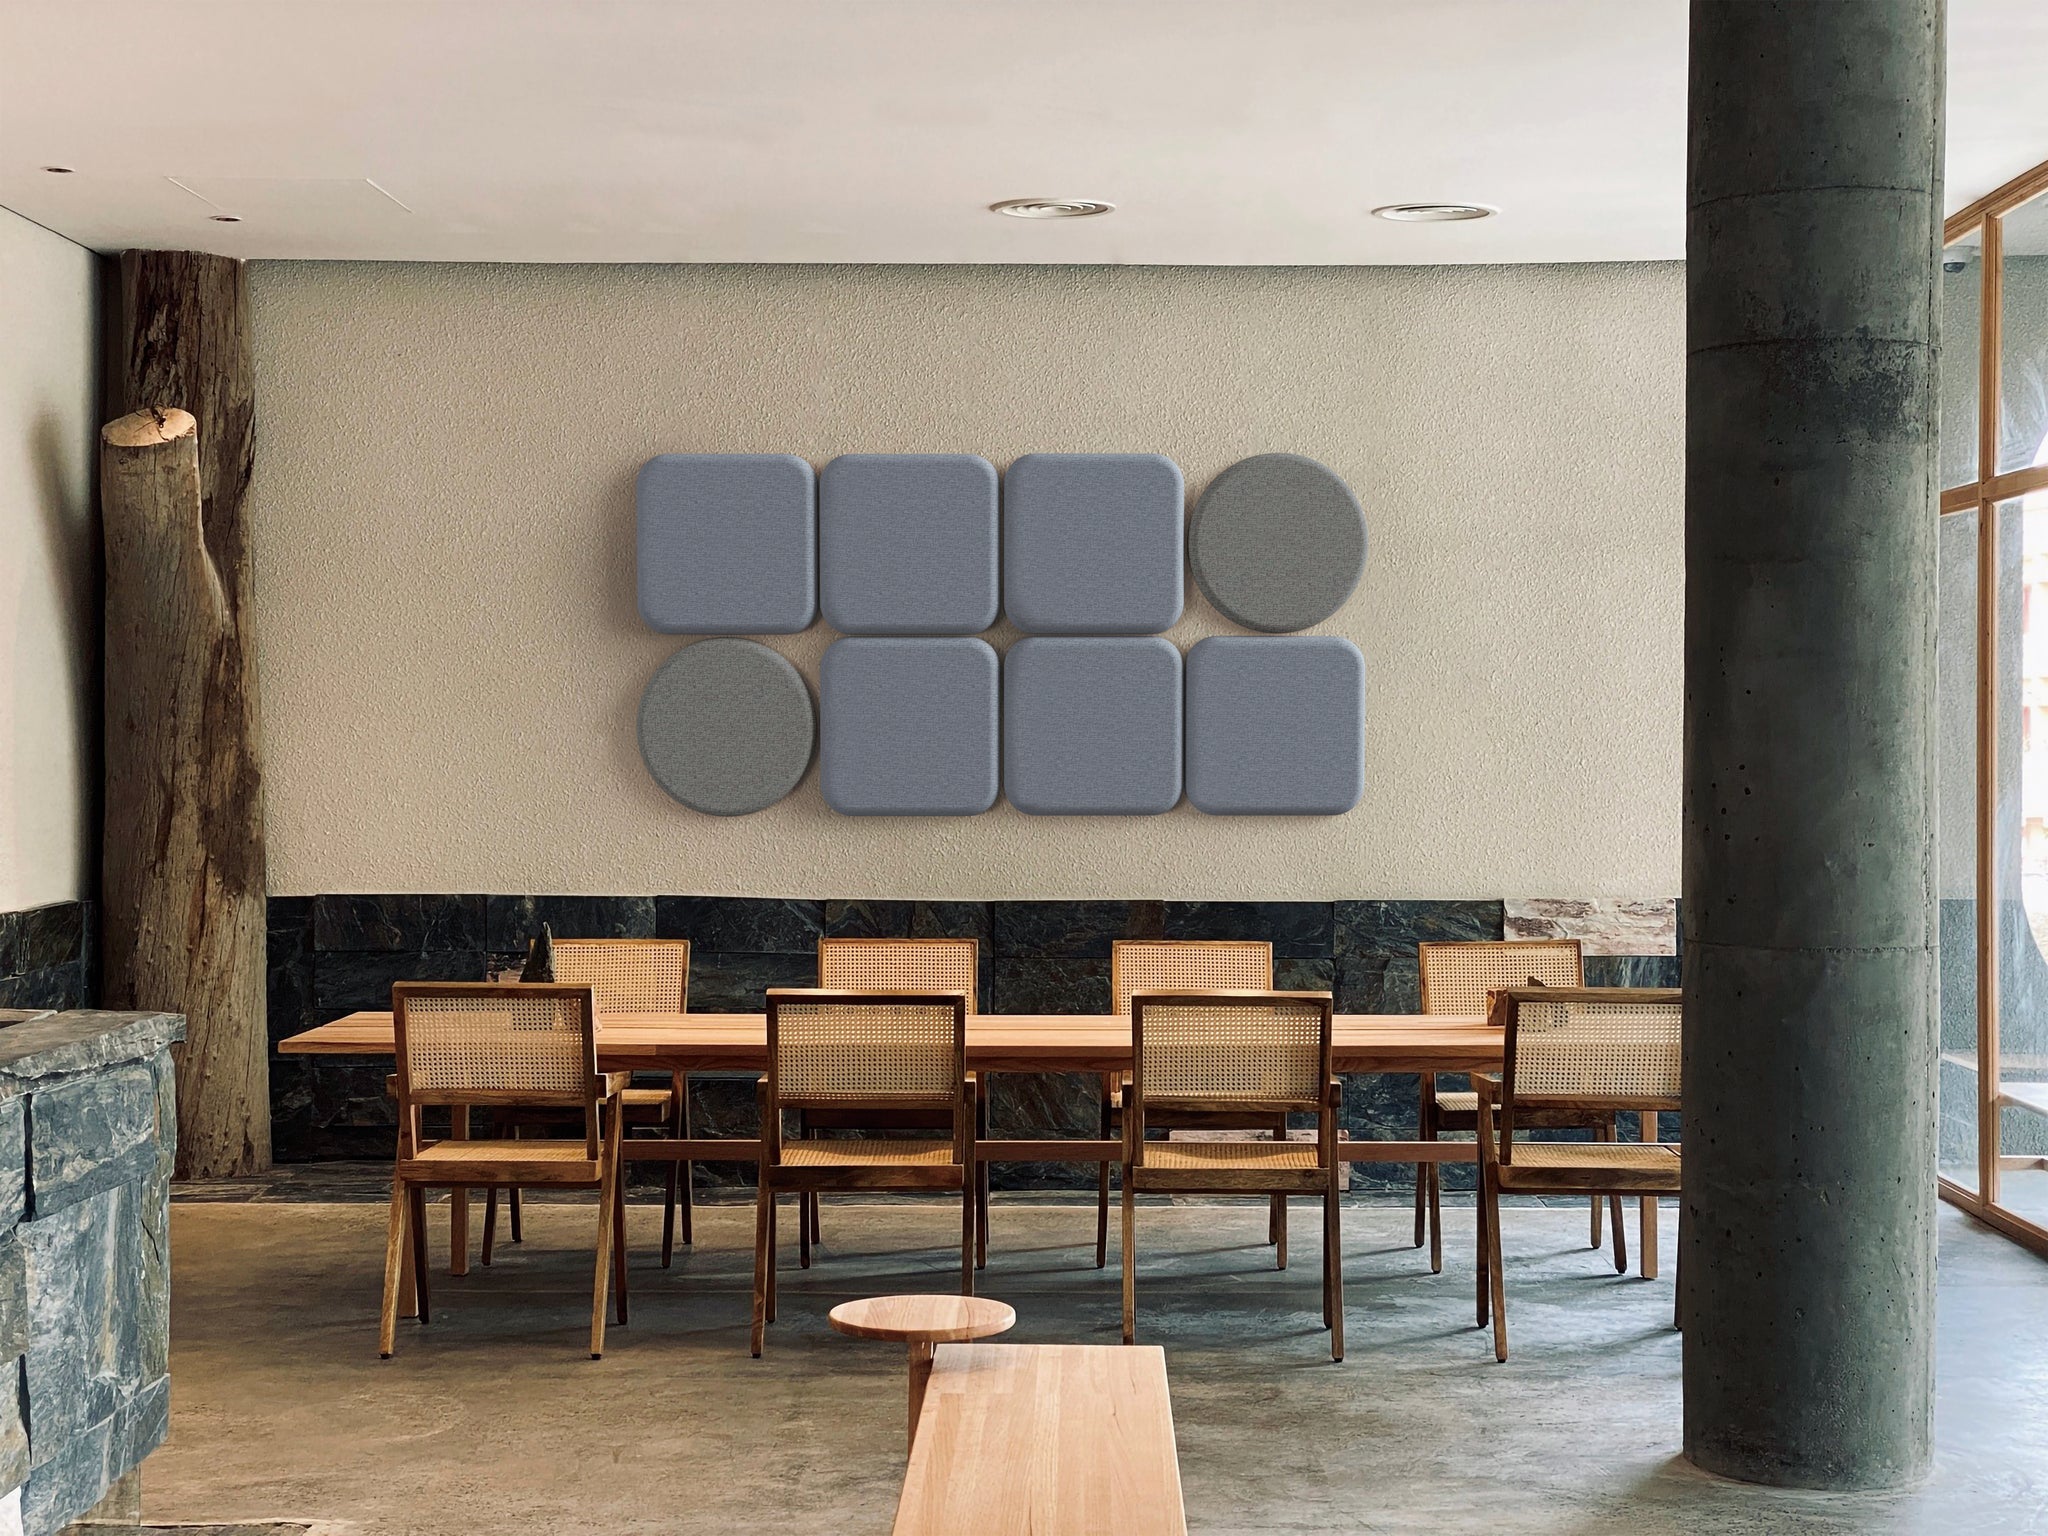 Acoustic Panels for Restaurants: Creating an Enjoyable Dining Experience